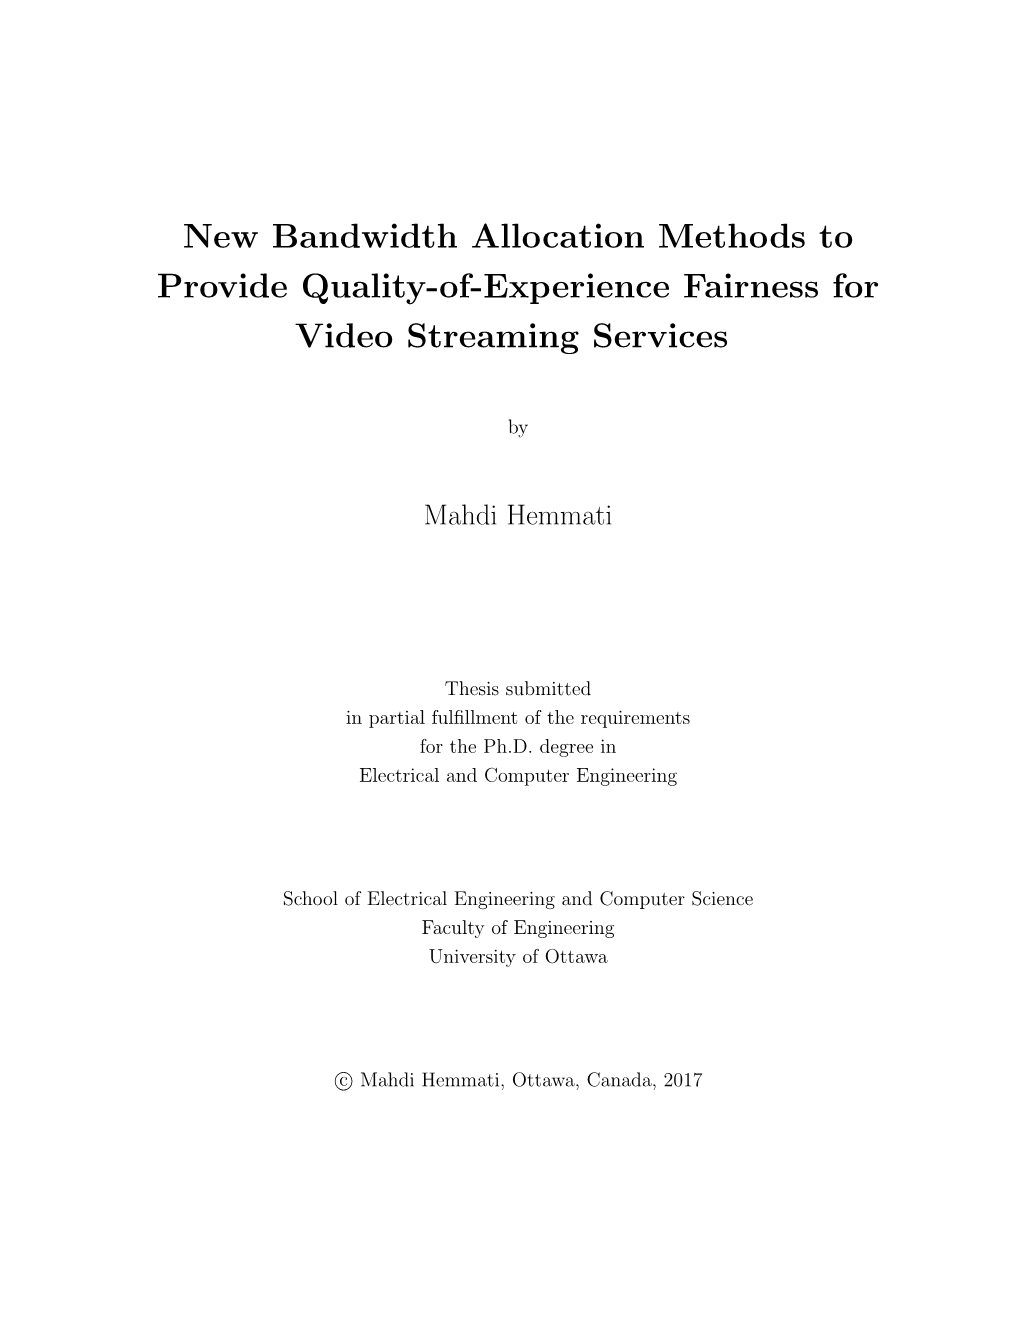 New Bandwidth Allocation Methods to Provide Quality-Of-Experience Fairness for Video Streaming Services